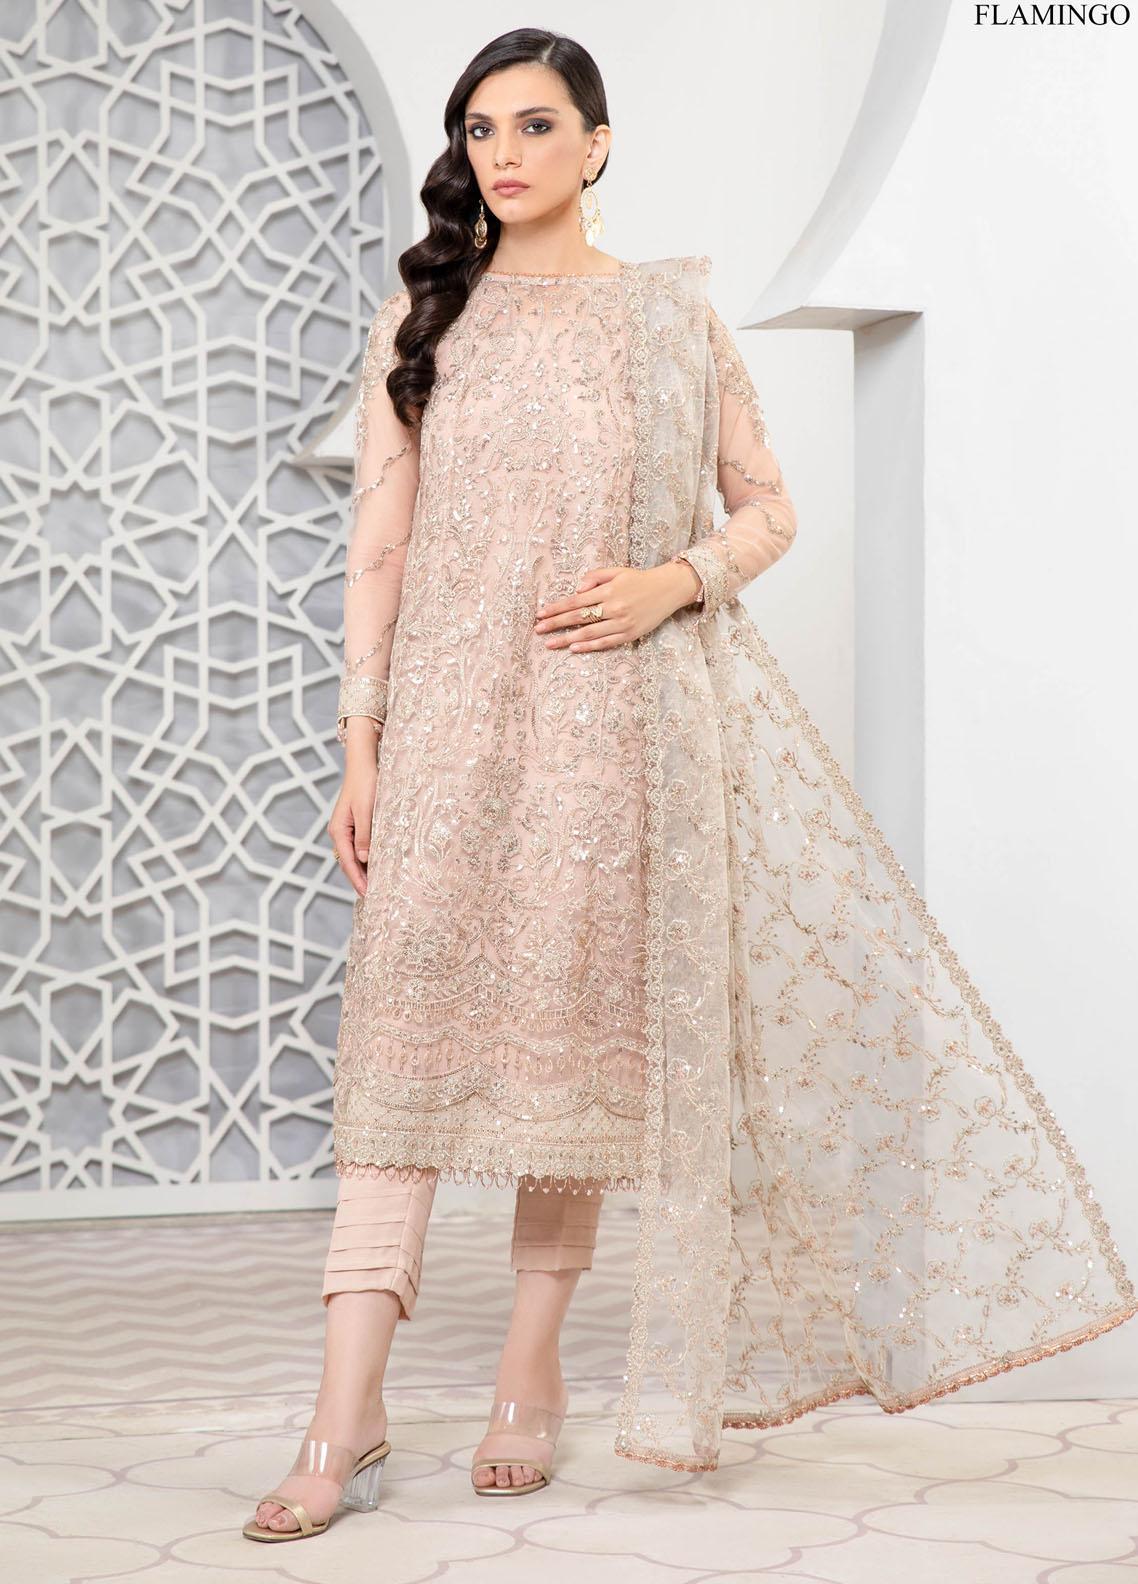 Pareesia by Zarif Embroidered Net Suit Unstitched 3 Piece ZPC22-09 Flamingo – Luxury Collection